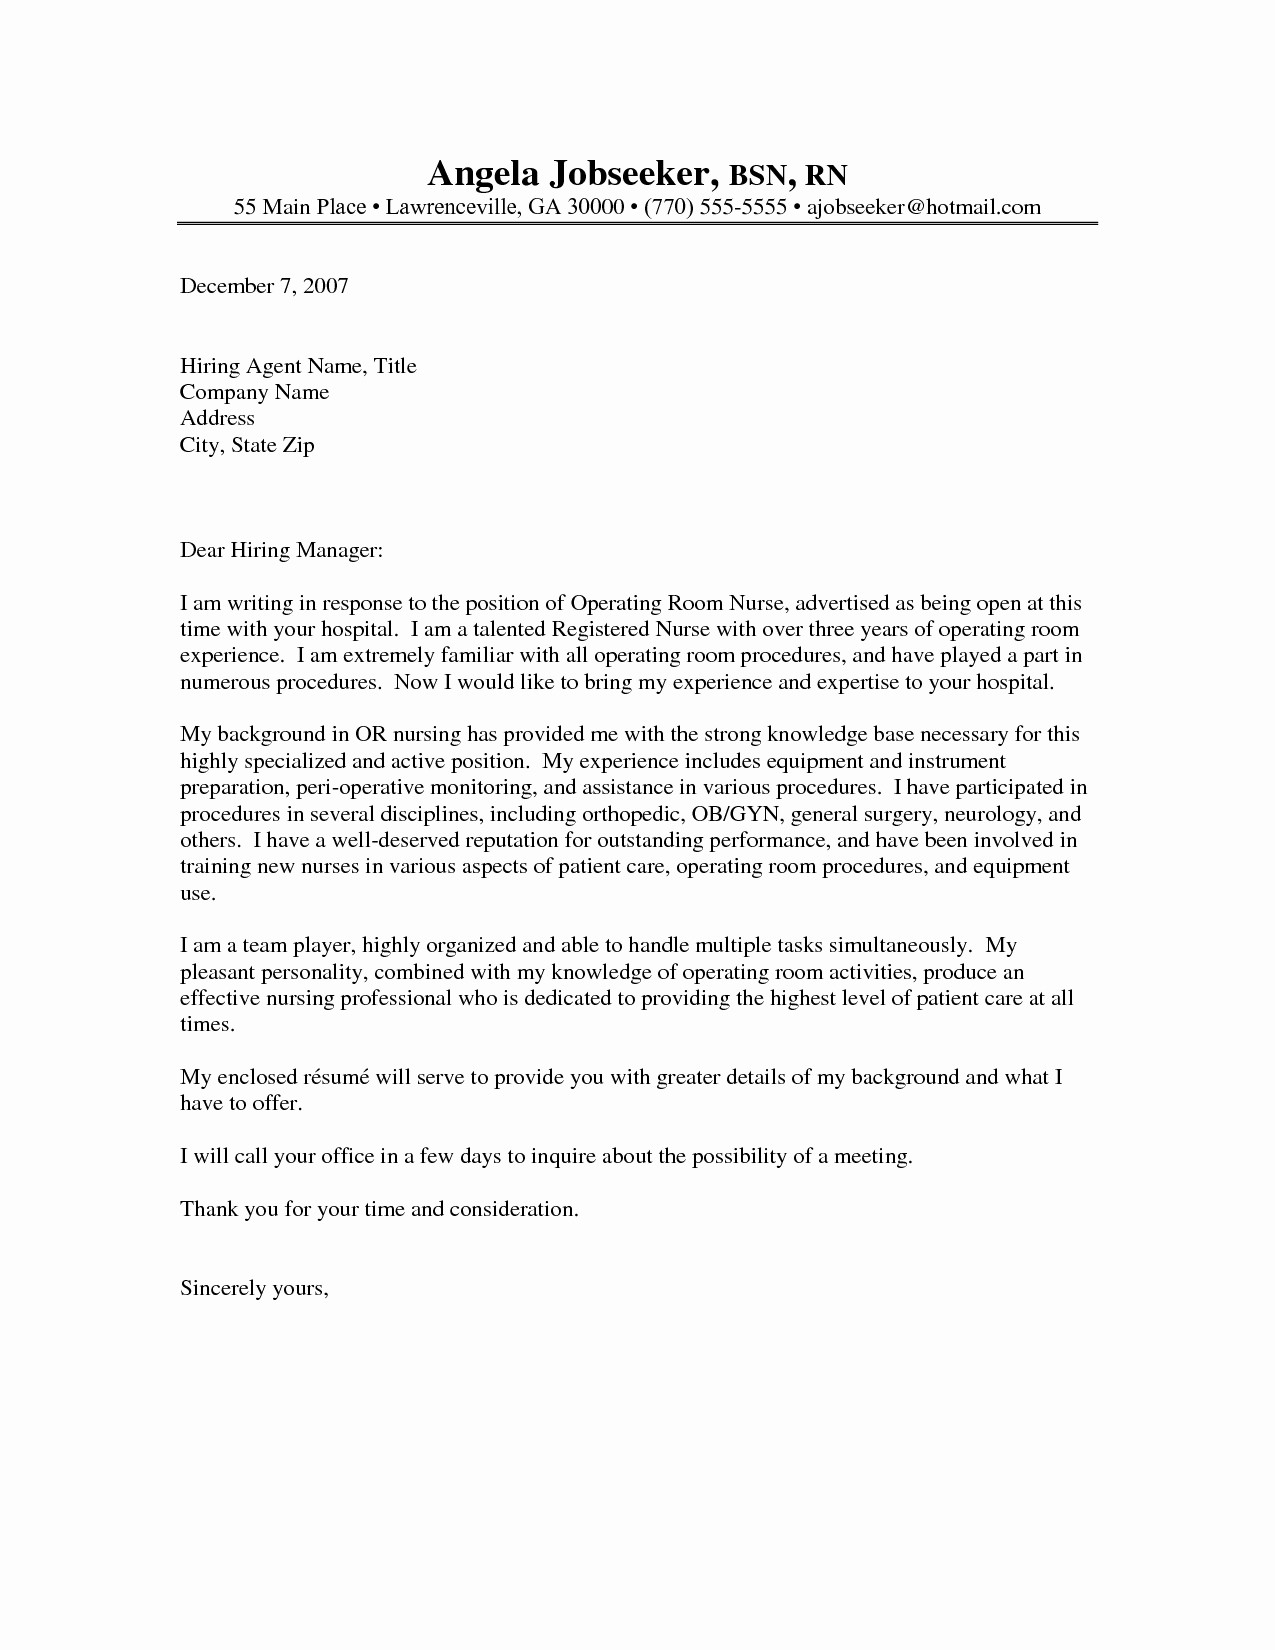 Resumes and Cover Letter Samples Best Of Good Cover Letter Examples